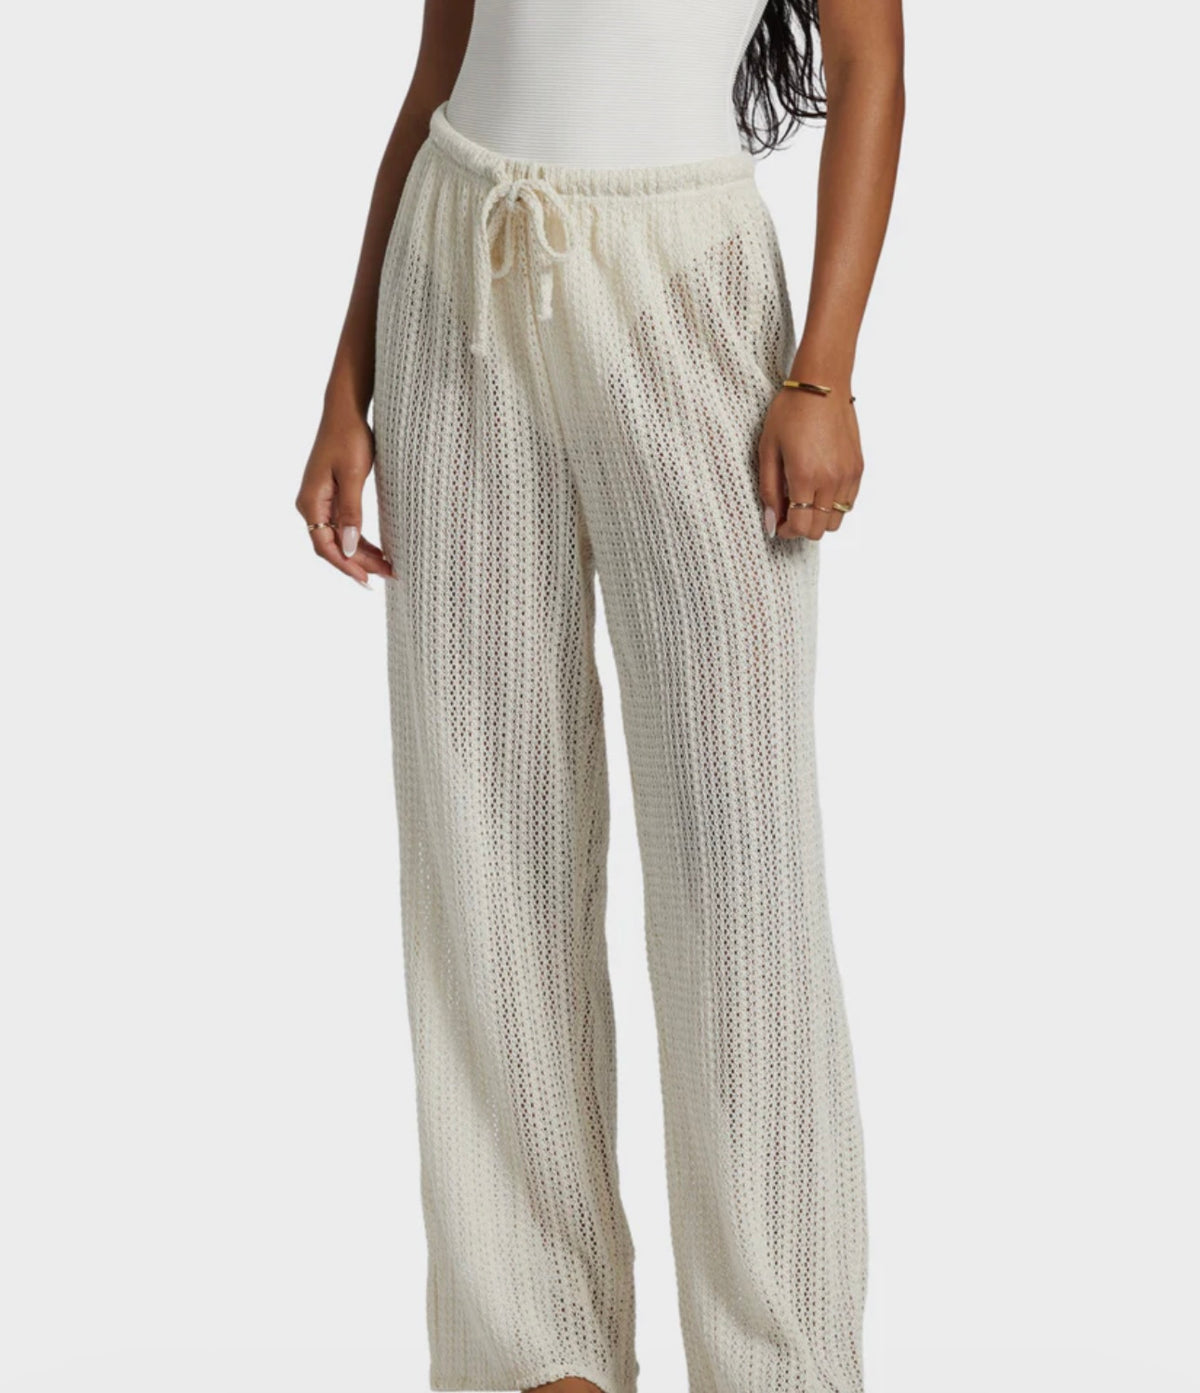 Largo Beach Pant Cover Up